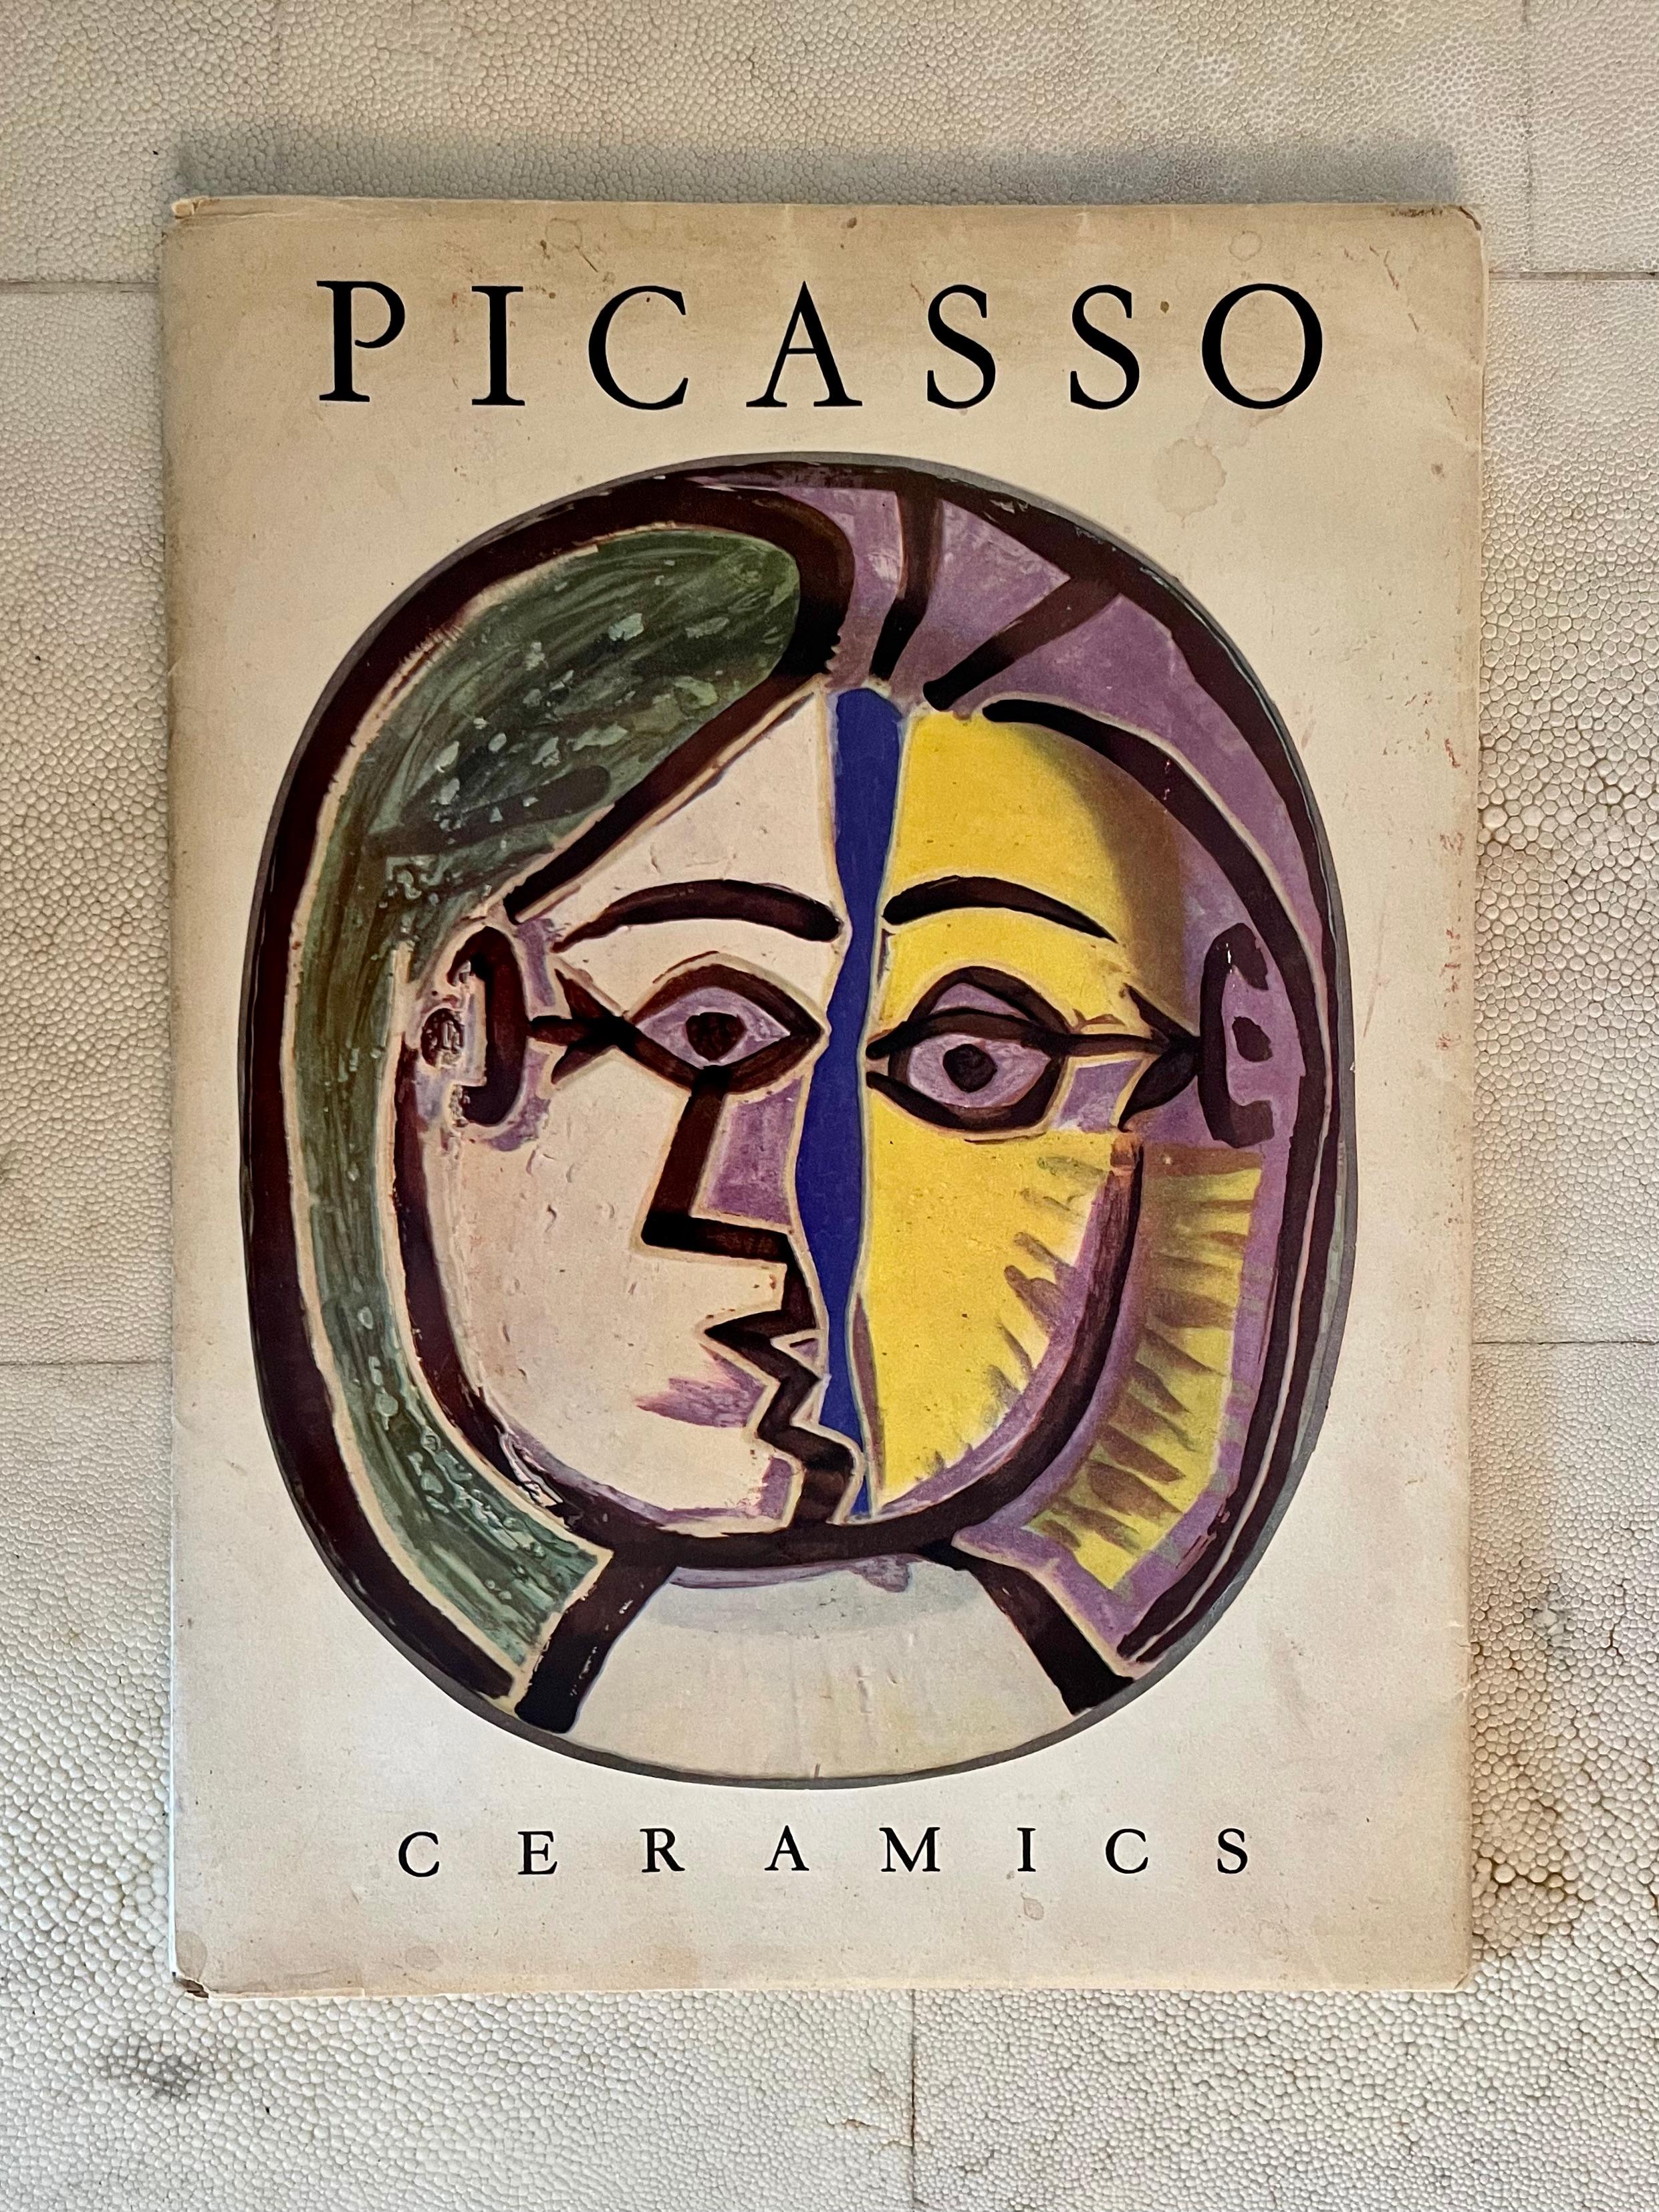 Pablo Picasso ceramics 
First edition, published by Albert Skira, Geneva 10 July 1950.

15 (14 inside, 1 on the cover) tipped-in photographs of Picasso ceramics. The prints are cut to the shape of the ceramic, with a glossy finish to mimic the